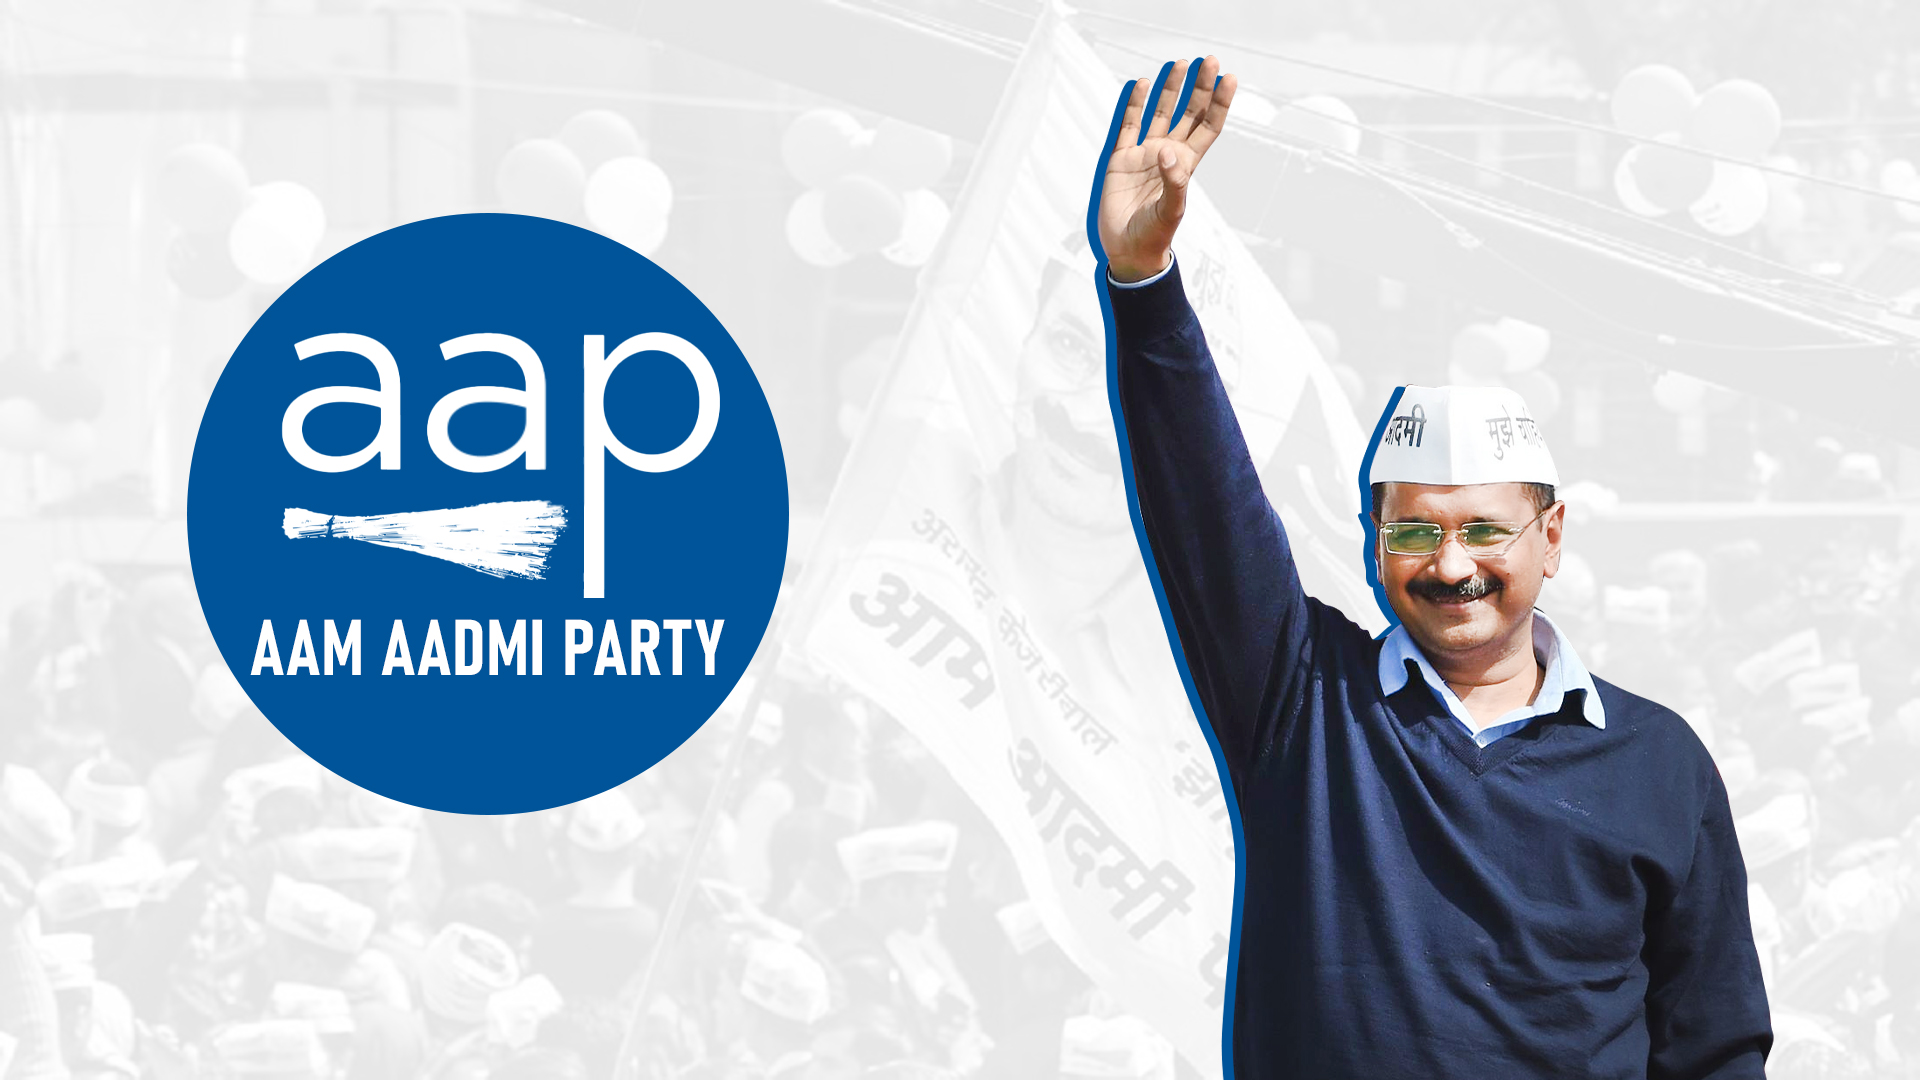 Rise of AAP in India